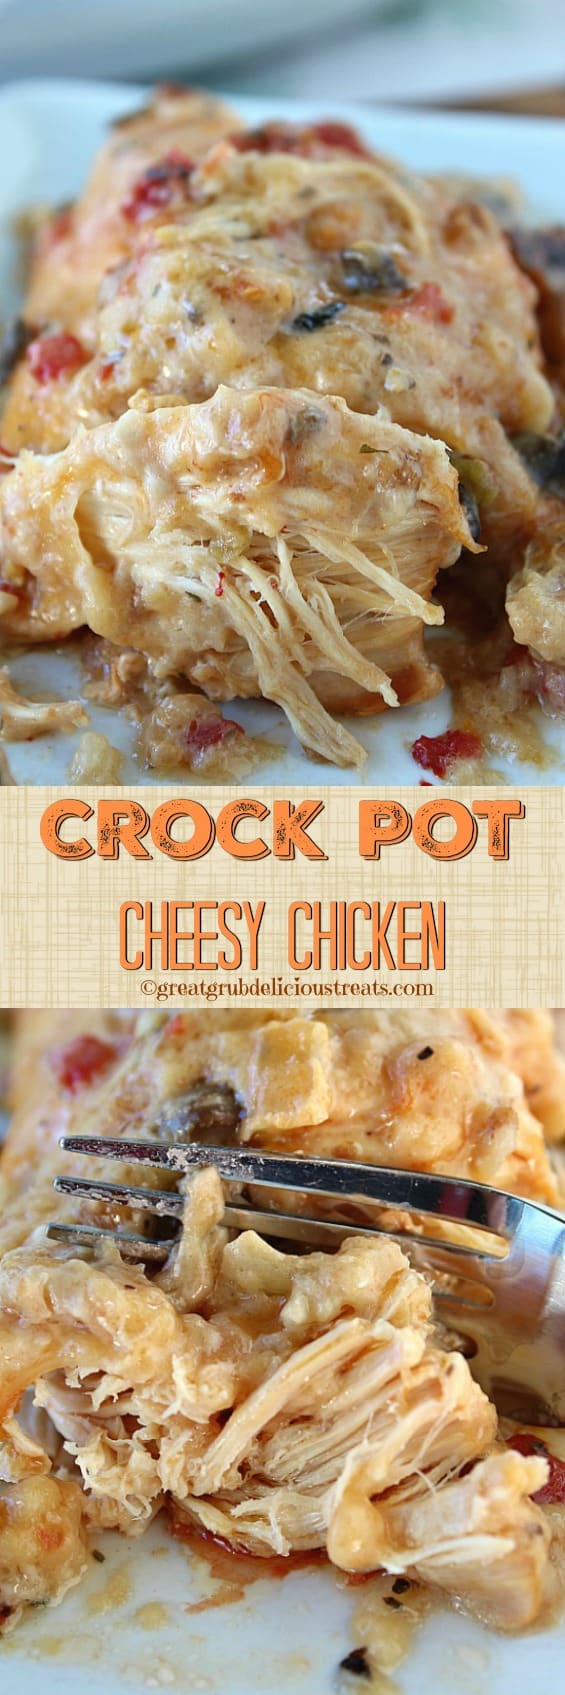 A double collage photo of crock pot cheesy chicken.